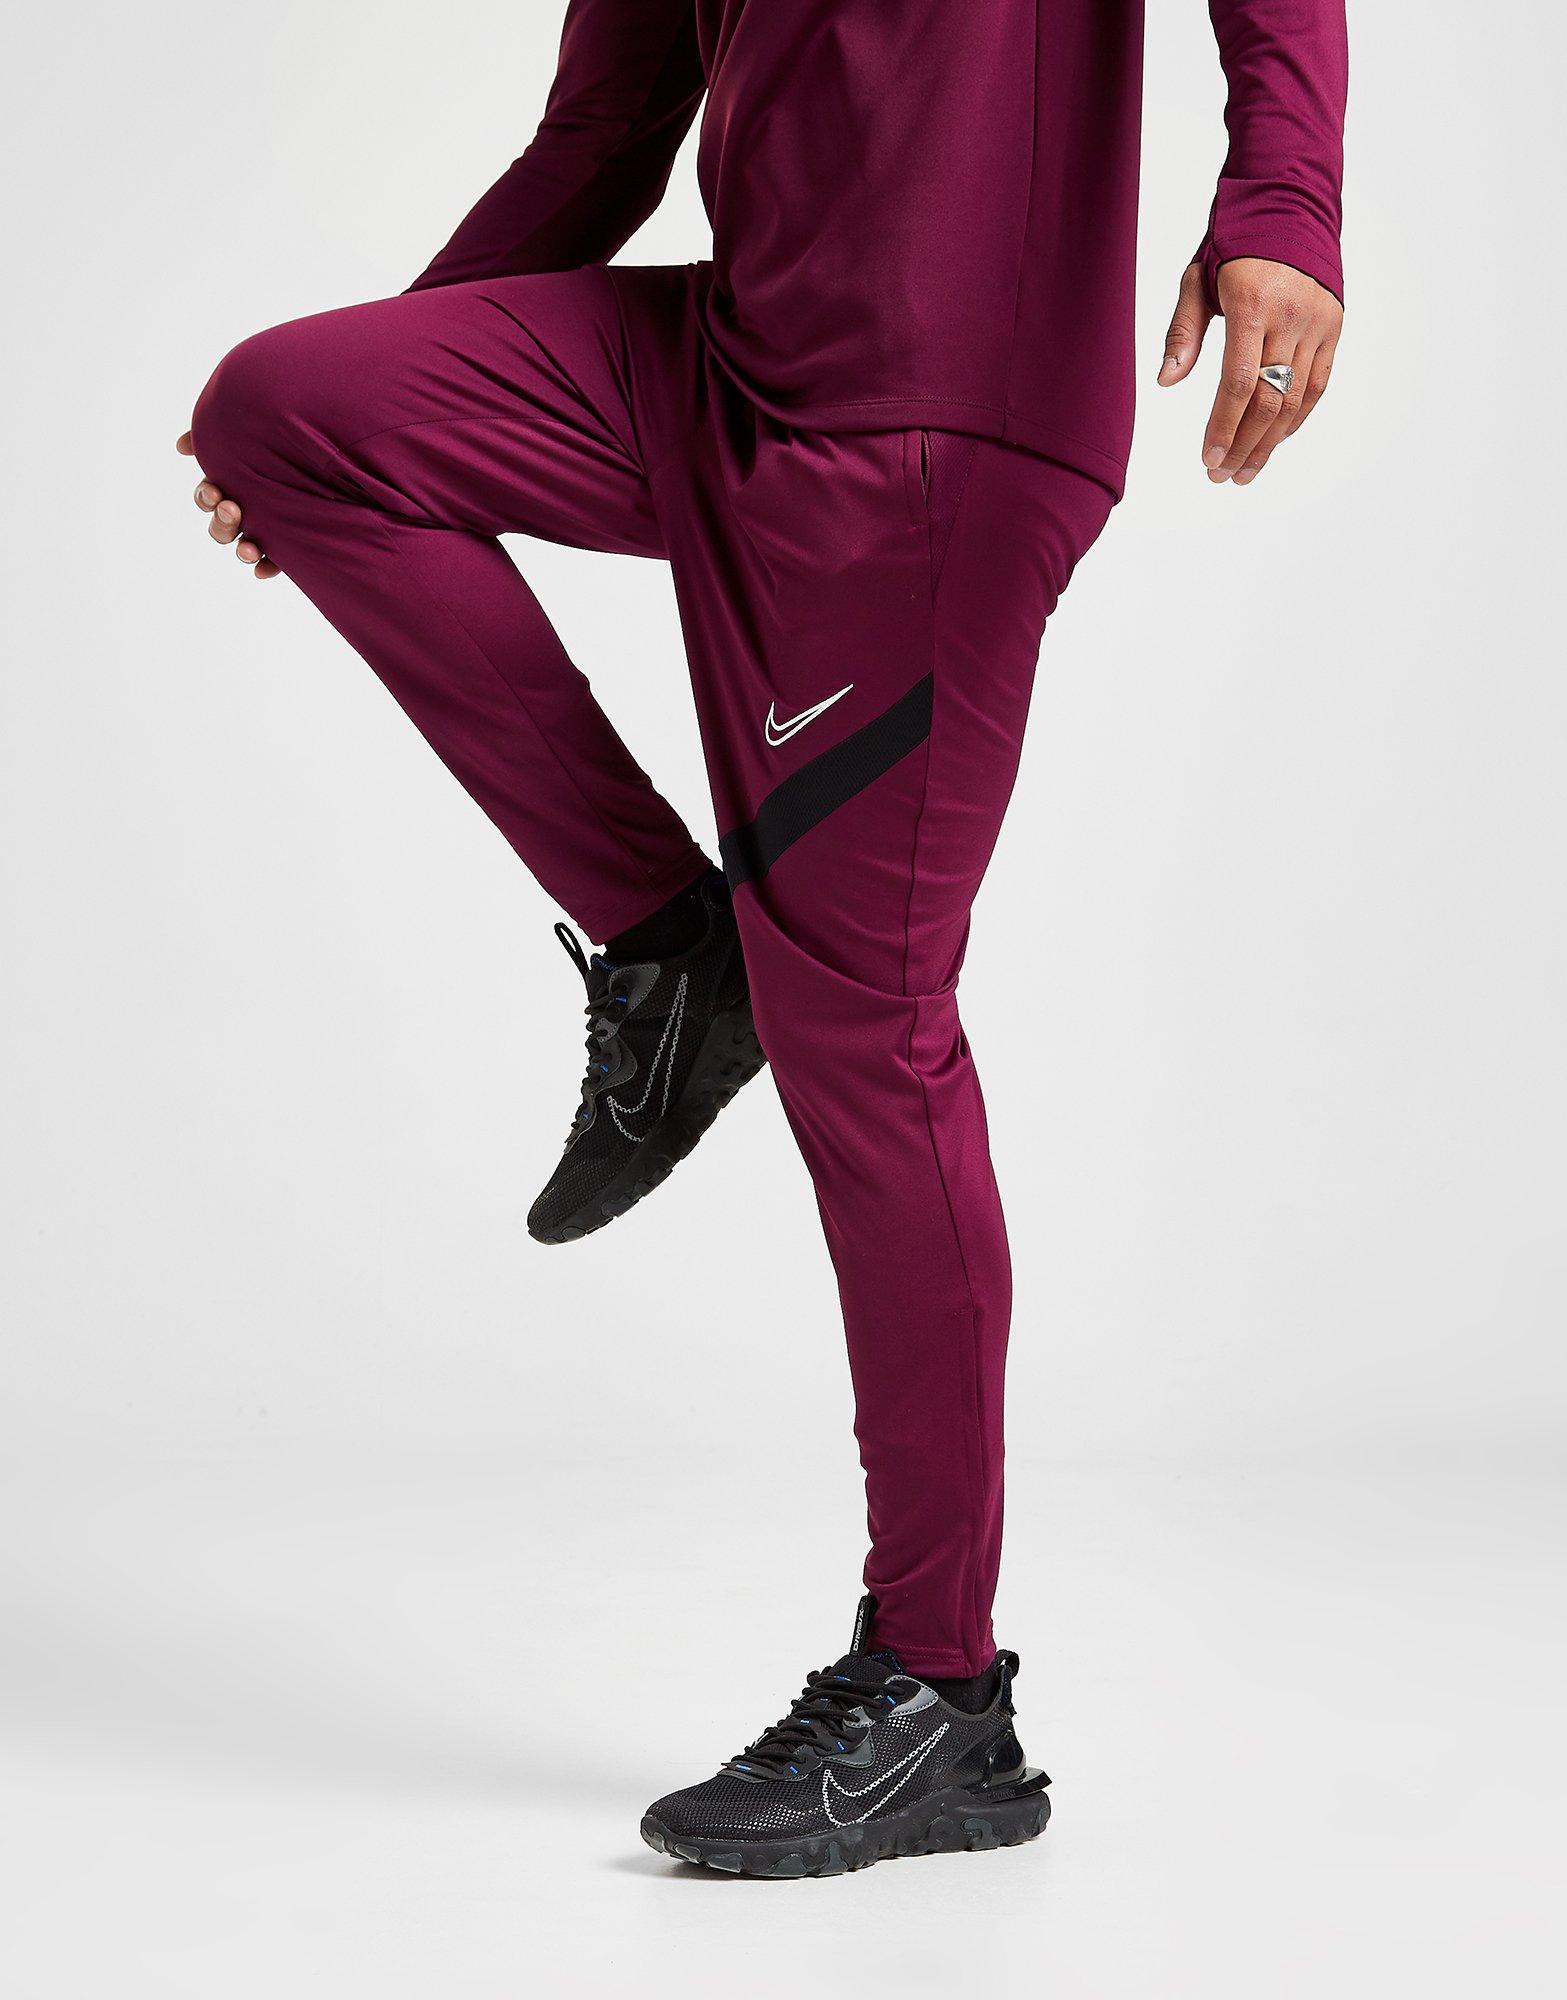 Red Nike Next Gen Academy Track Pants 